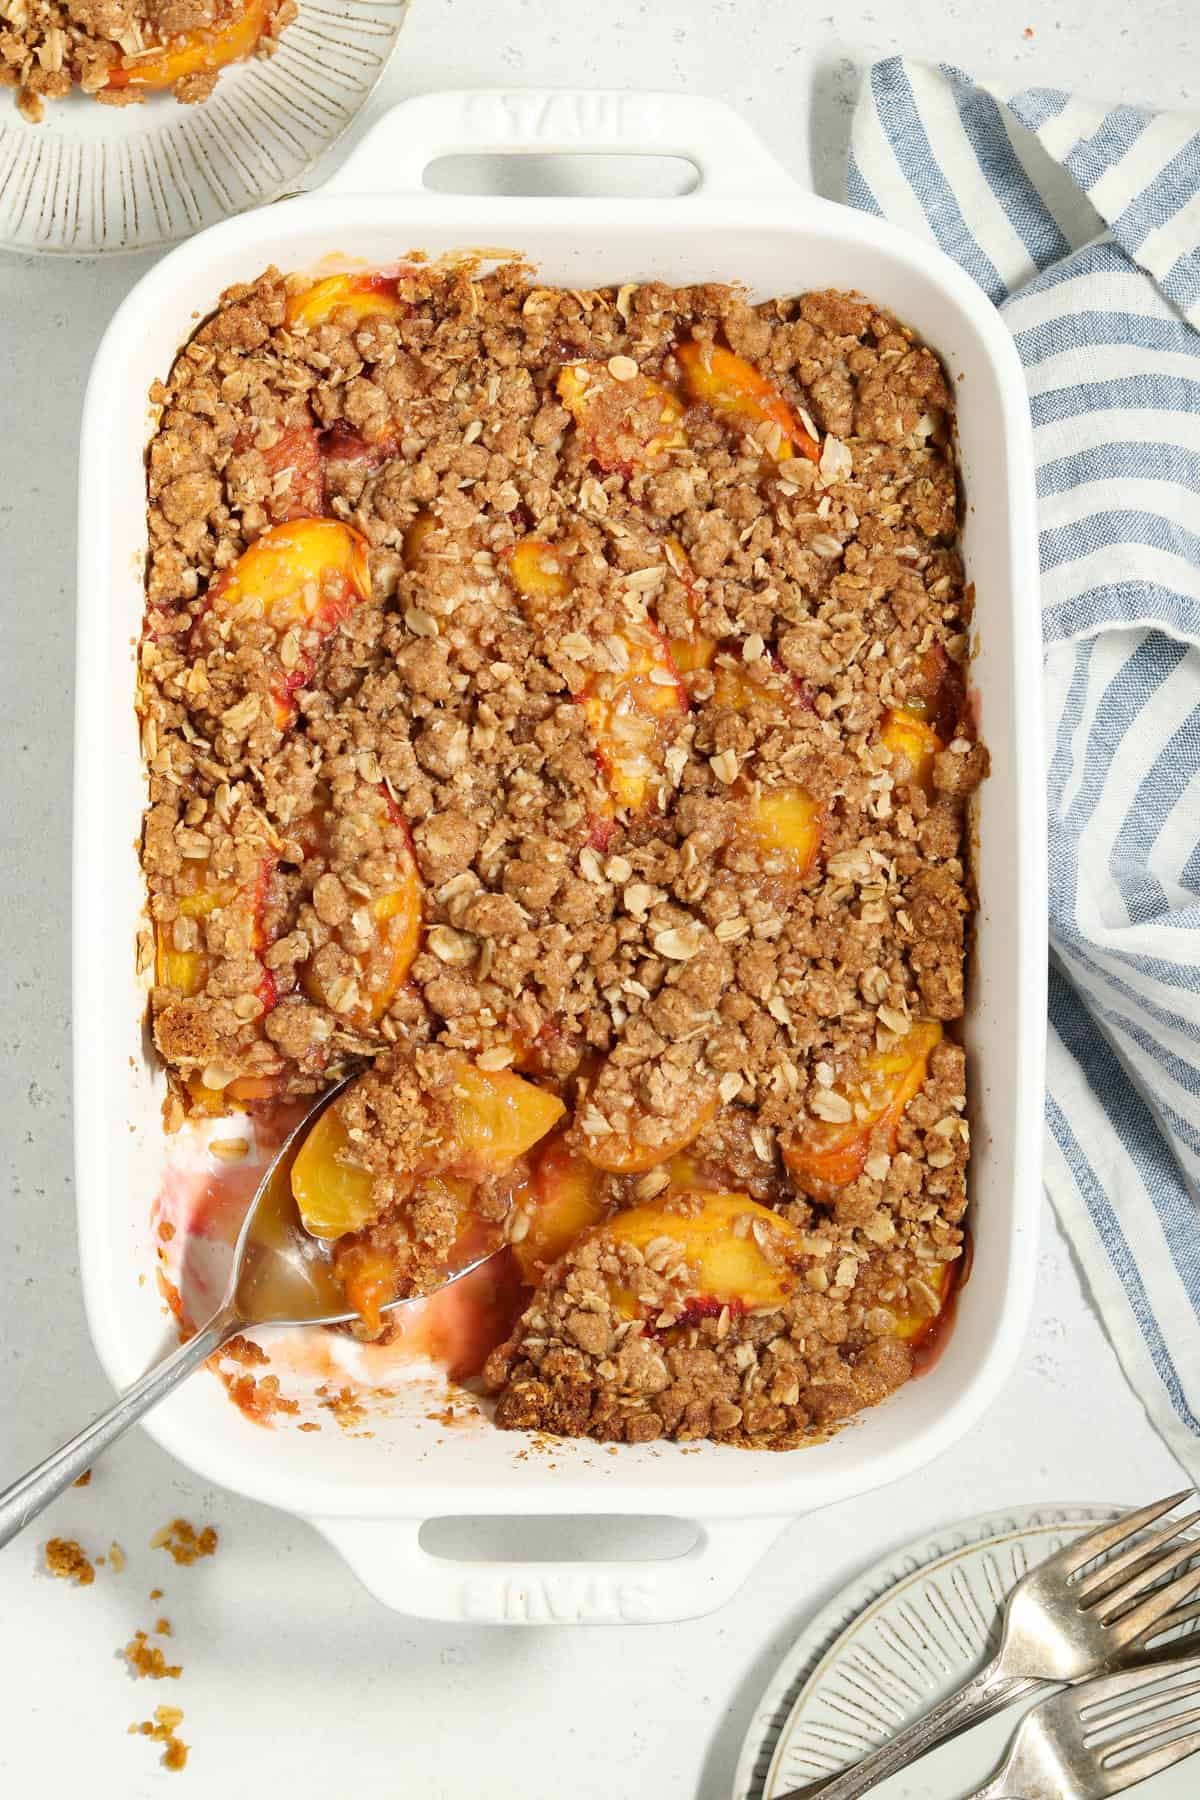 Overhead view of fully baked vegan peach crisp in a white casserole dish.